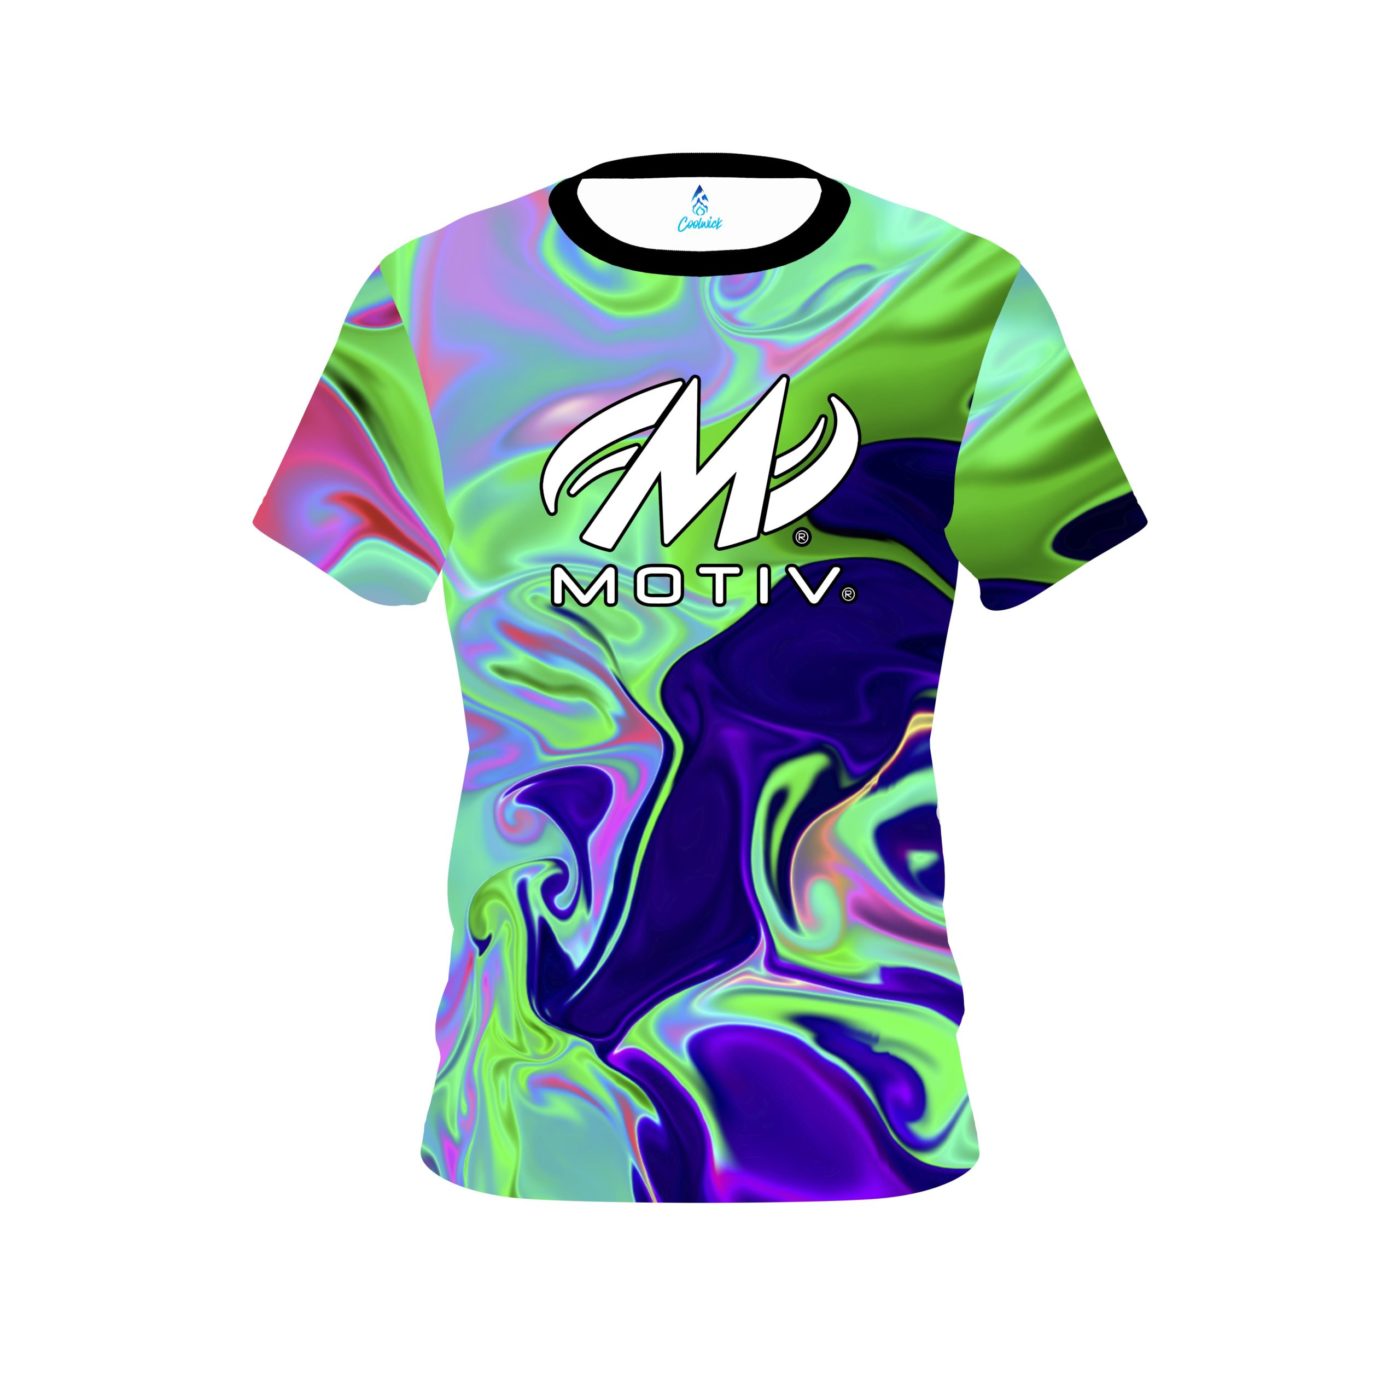 Motiv Trippy CoolWick Bowling Jersey Questions & Answers